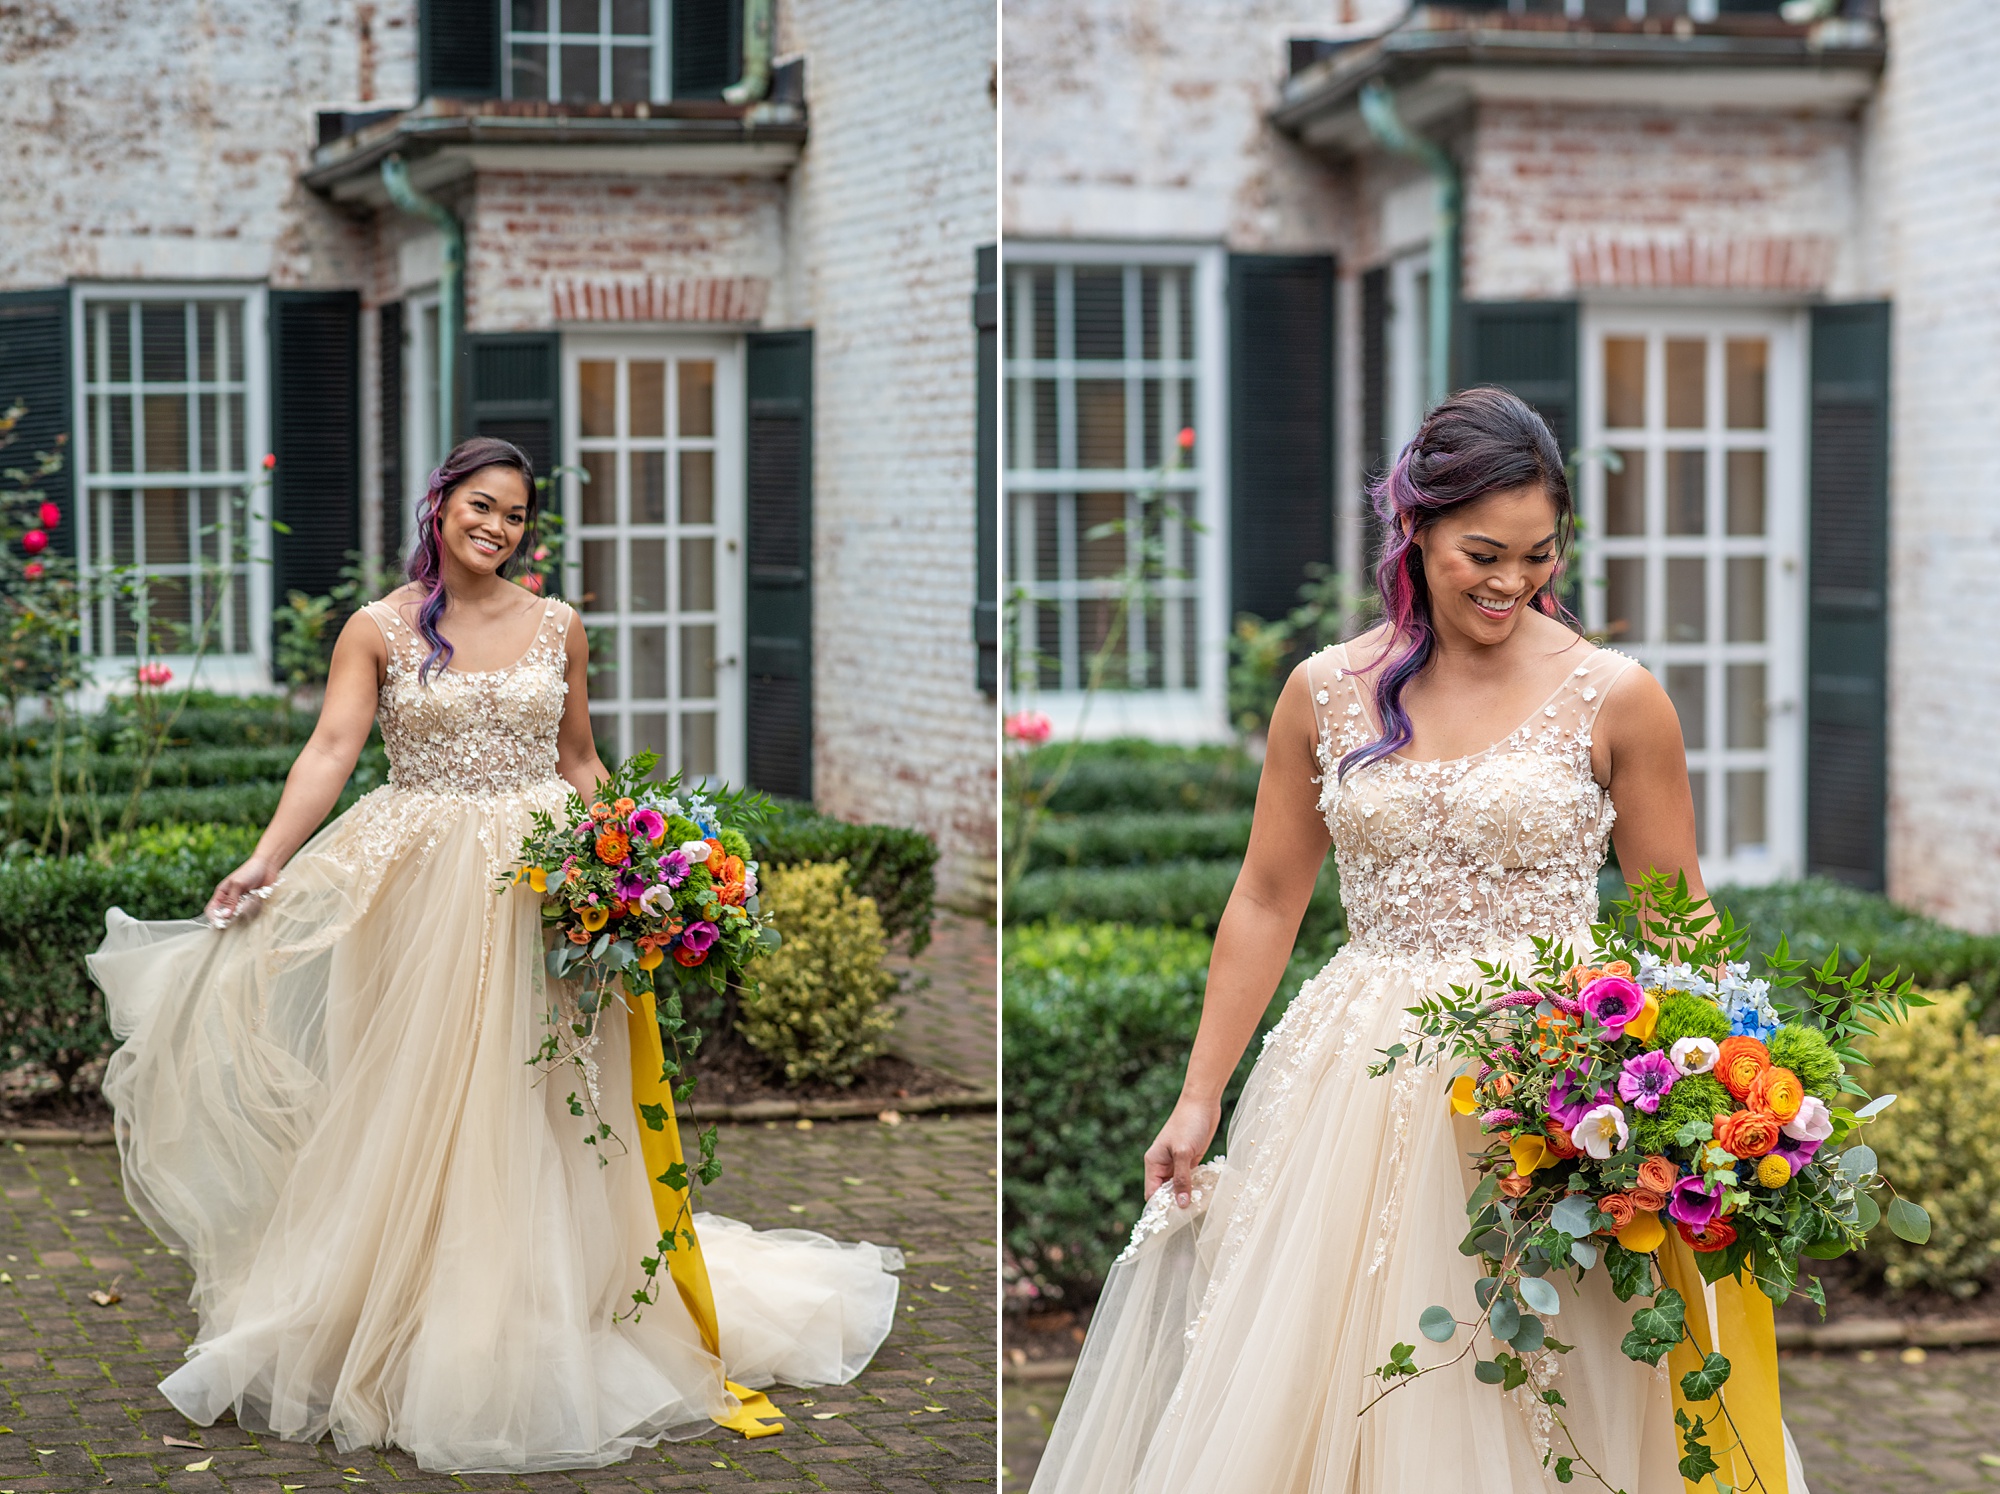 bride in wedding gown with amber tint laughs during portraits